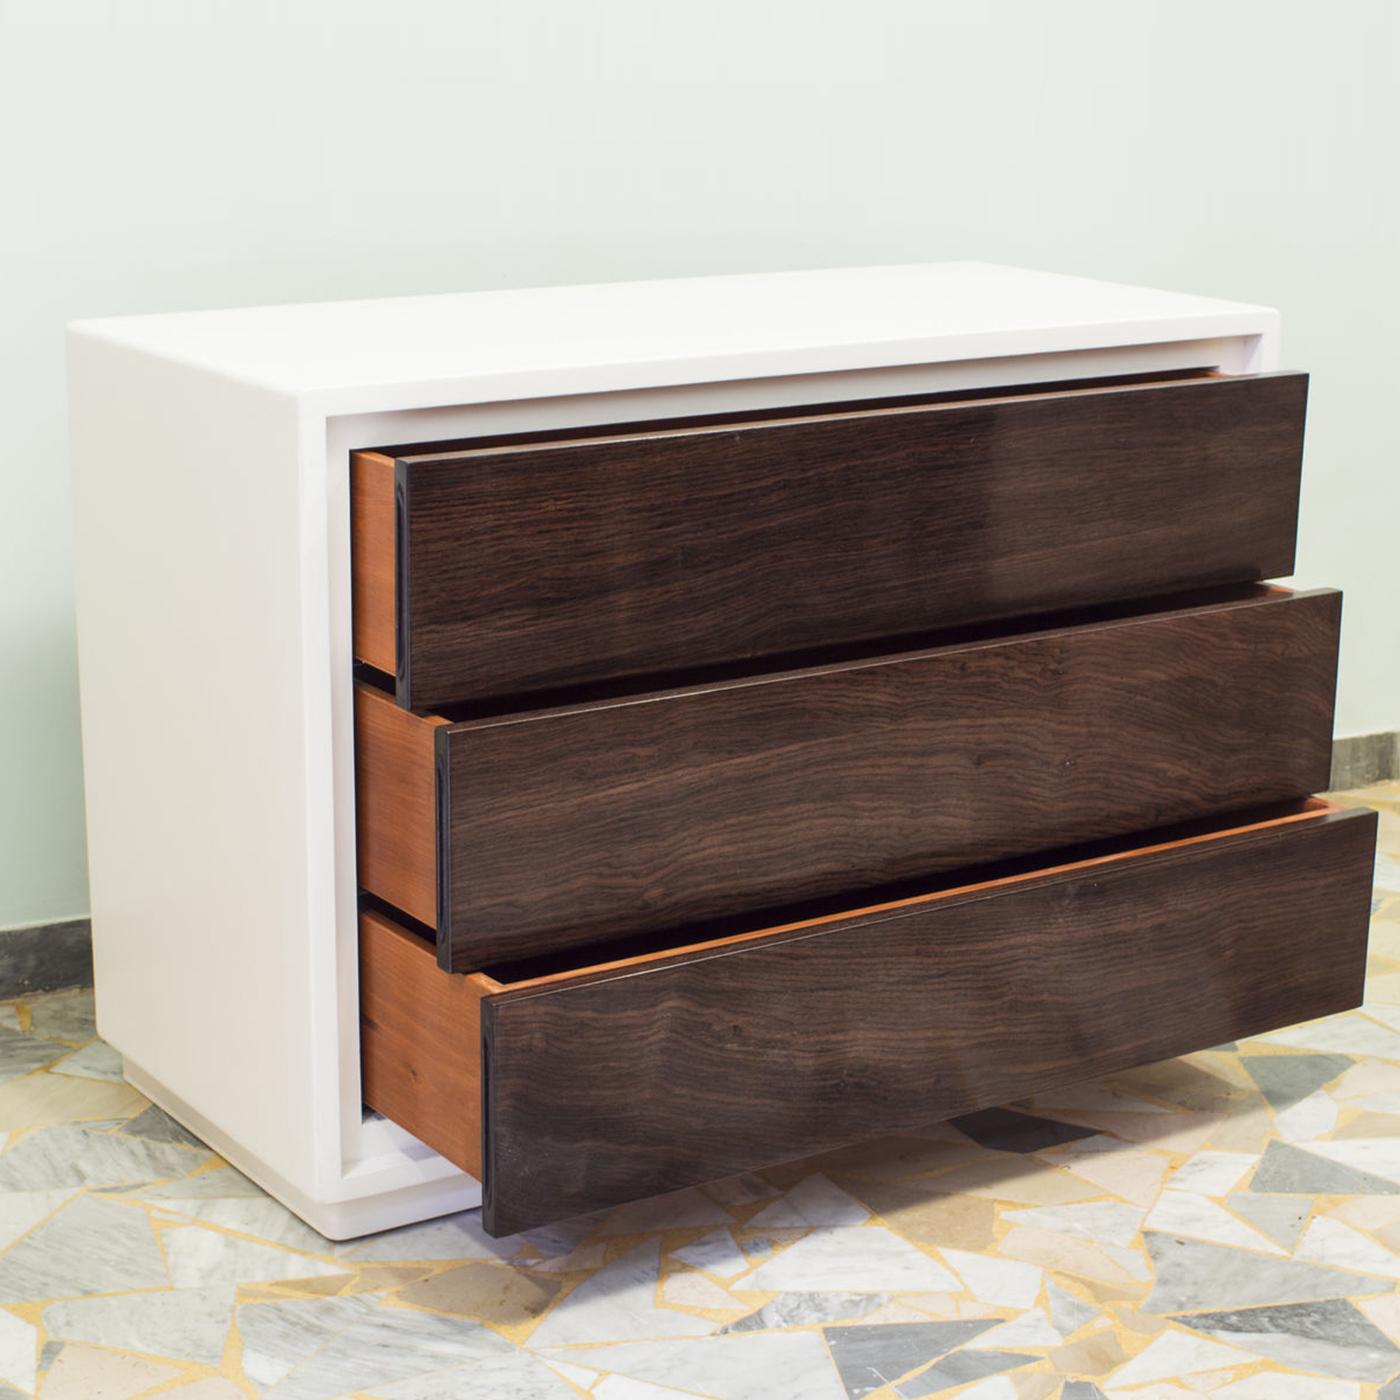 Rich in storage potential, this large dresser exudes Art Deco glamour with its linear design and contrasting chromatic finishes. The blockboard wood frame with white-lacquered finish encloses three handle-free beechwood drawers with shellacked